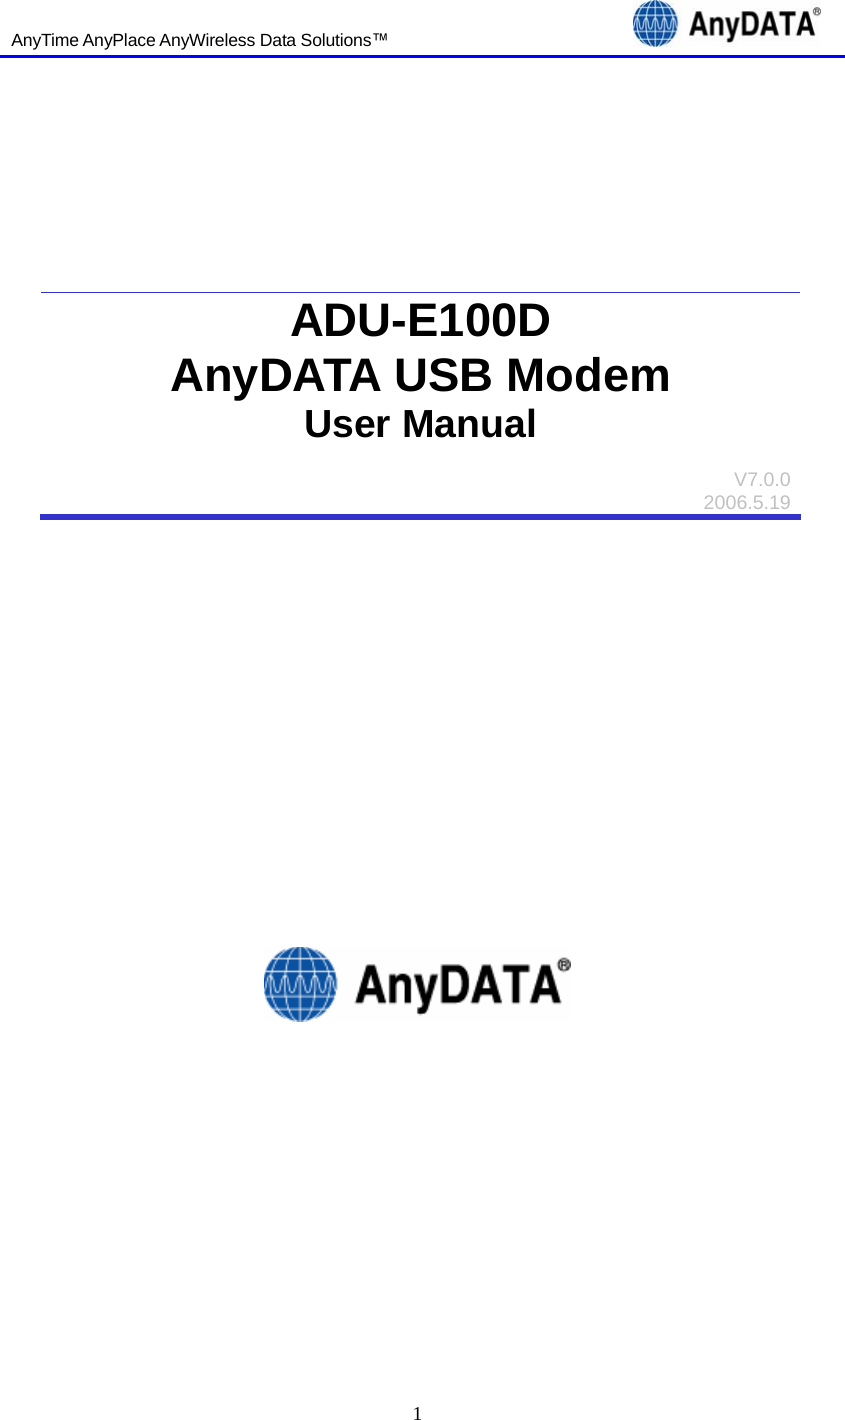   AnyTime AnyPlace AnyWireless Data Solutions™                                 1            ADU-E100D AnyDATA USB Modem User Manual  V7.0.0 2006.5.19                                    